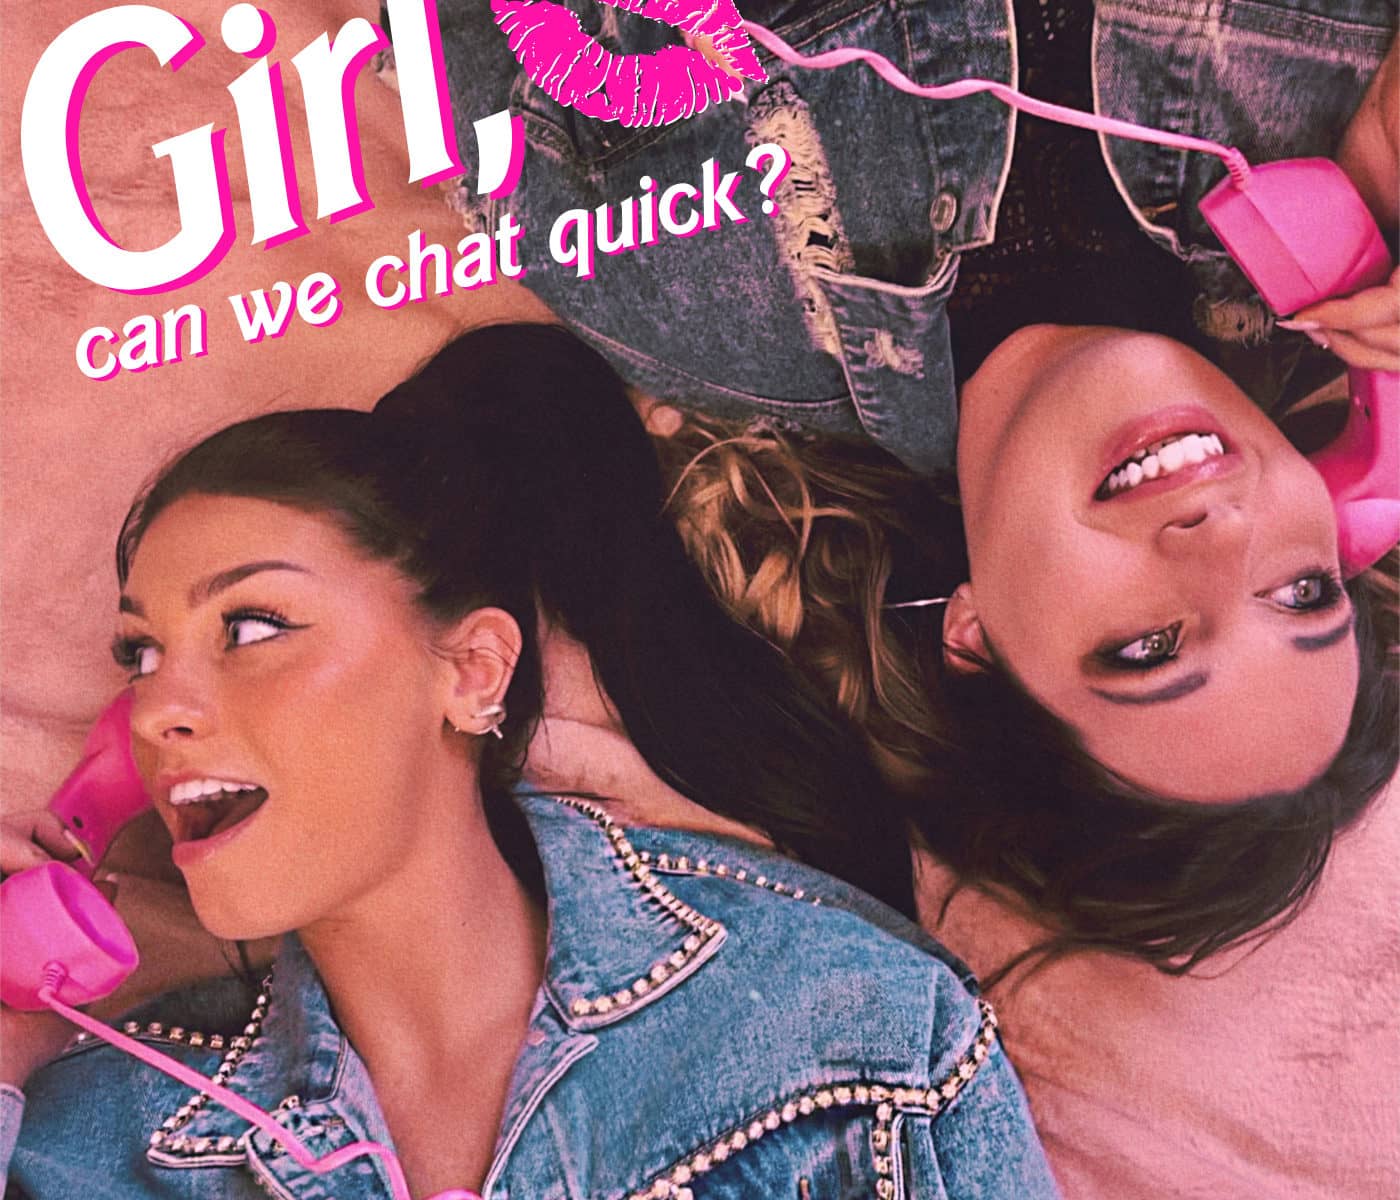 girl_can_we_chat_quick_podcast-10